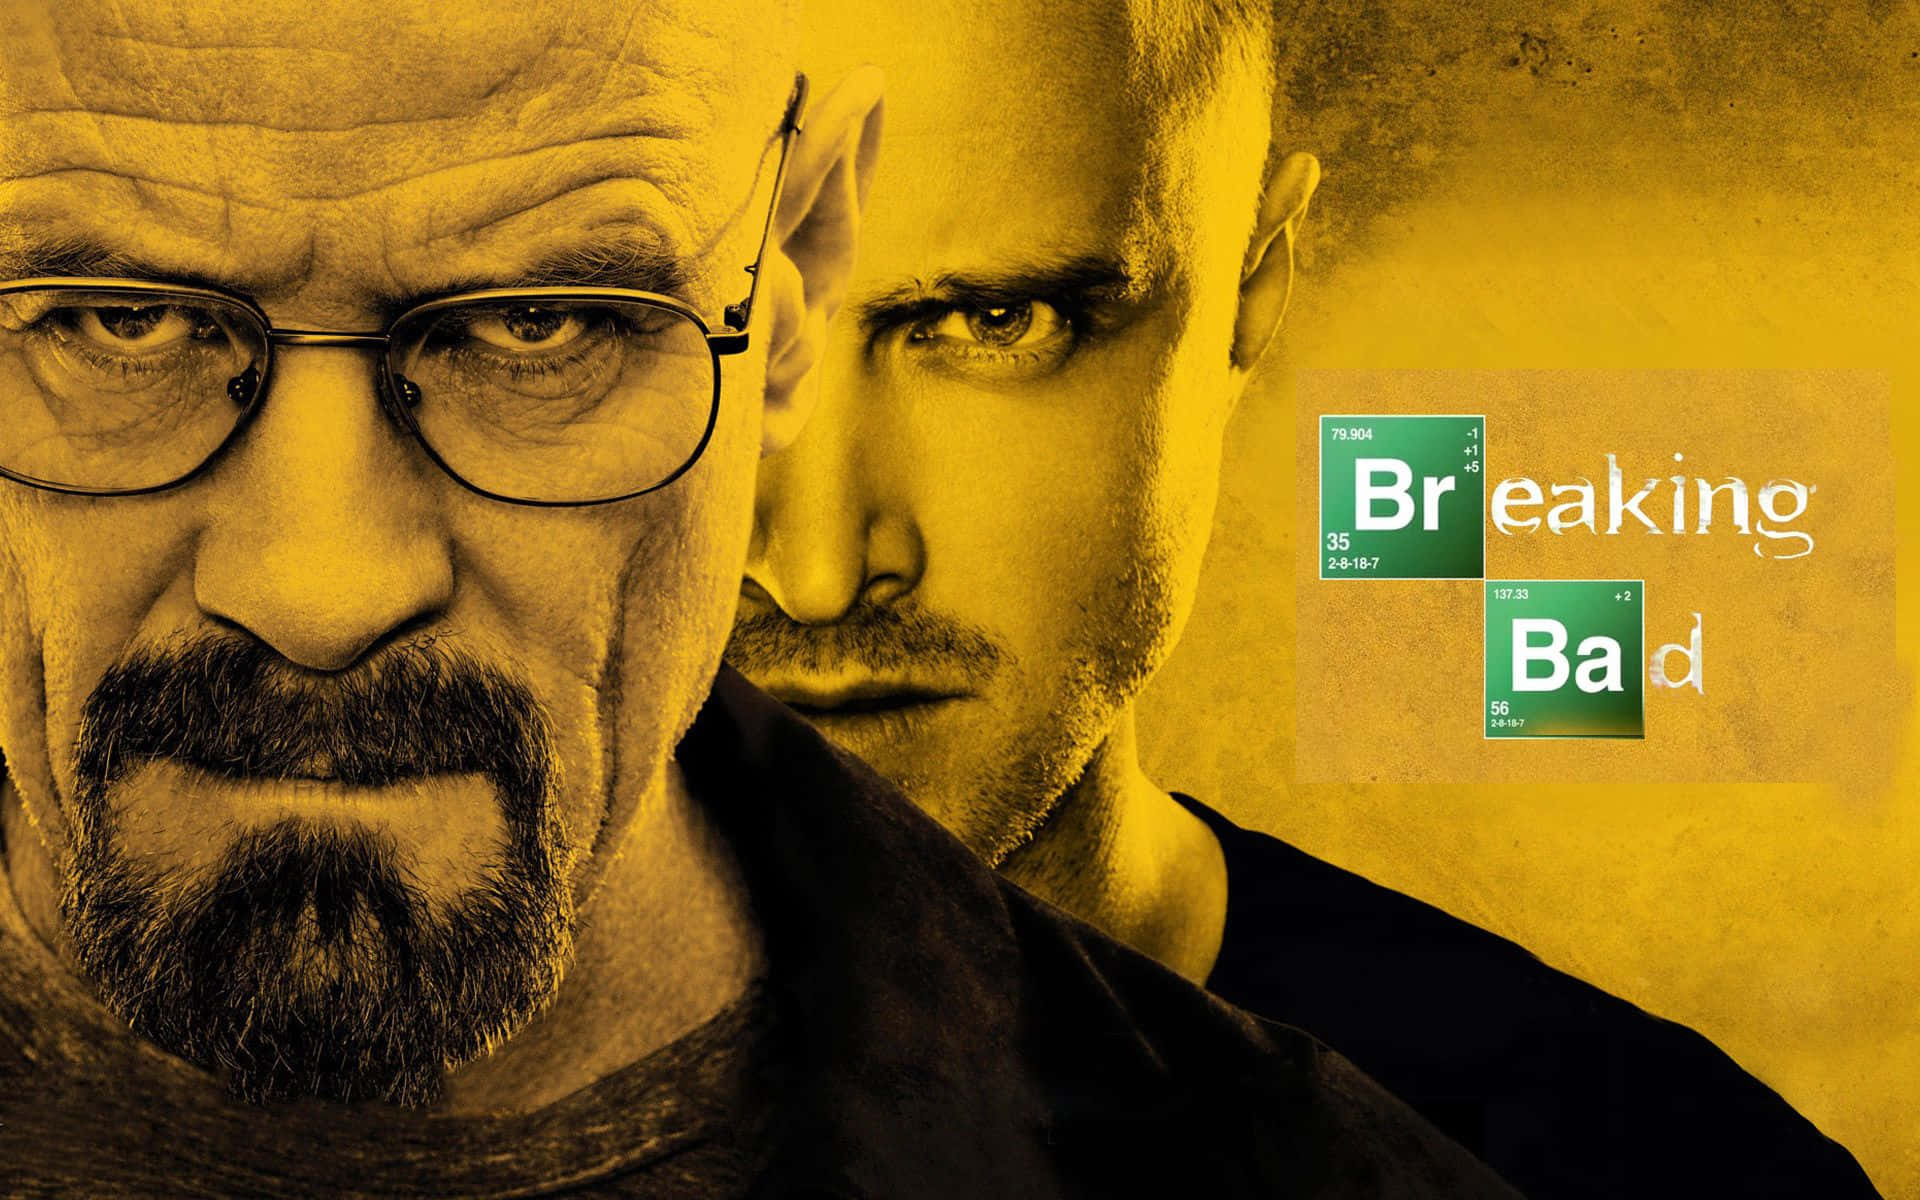 Walter White and Jesse Pinkman – the two masterminds of Breaking Bad!